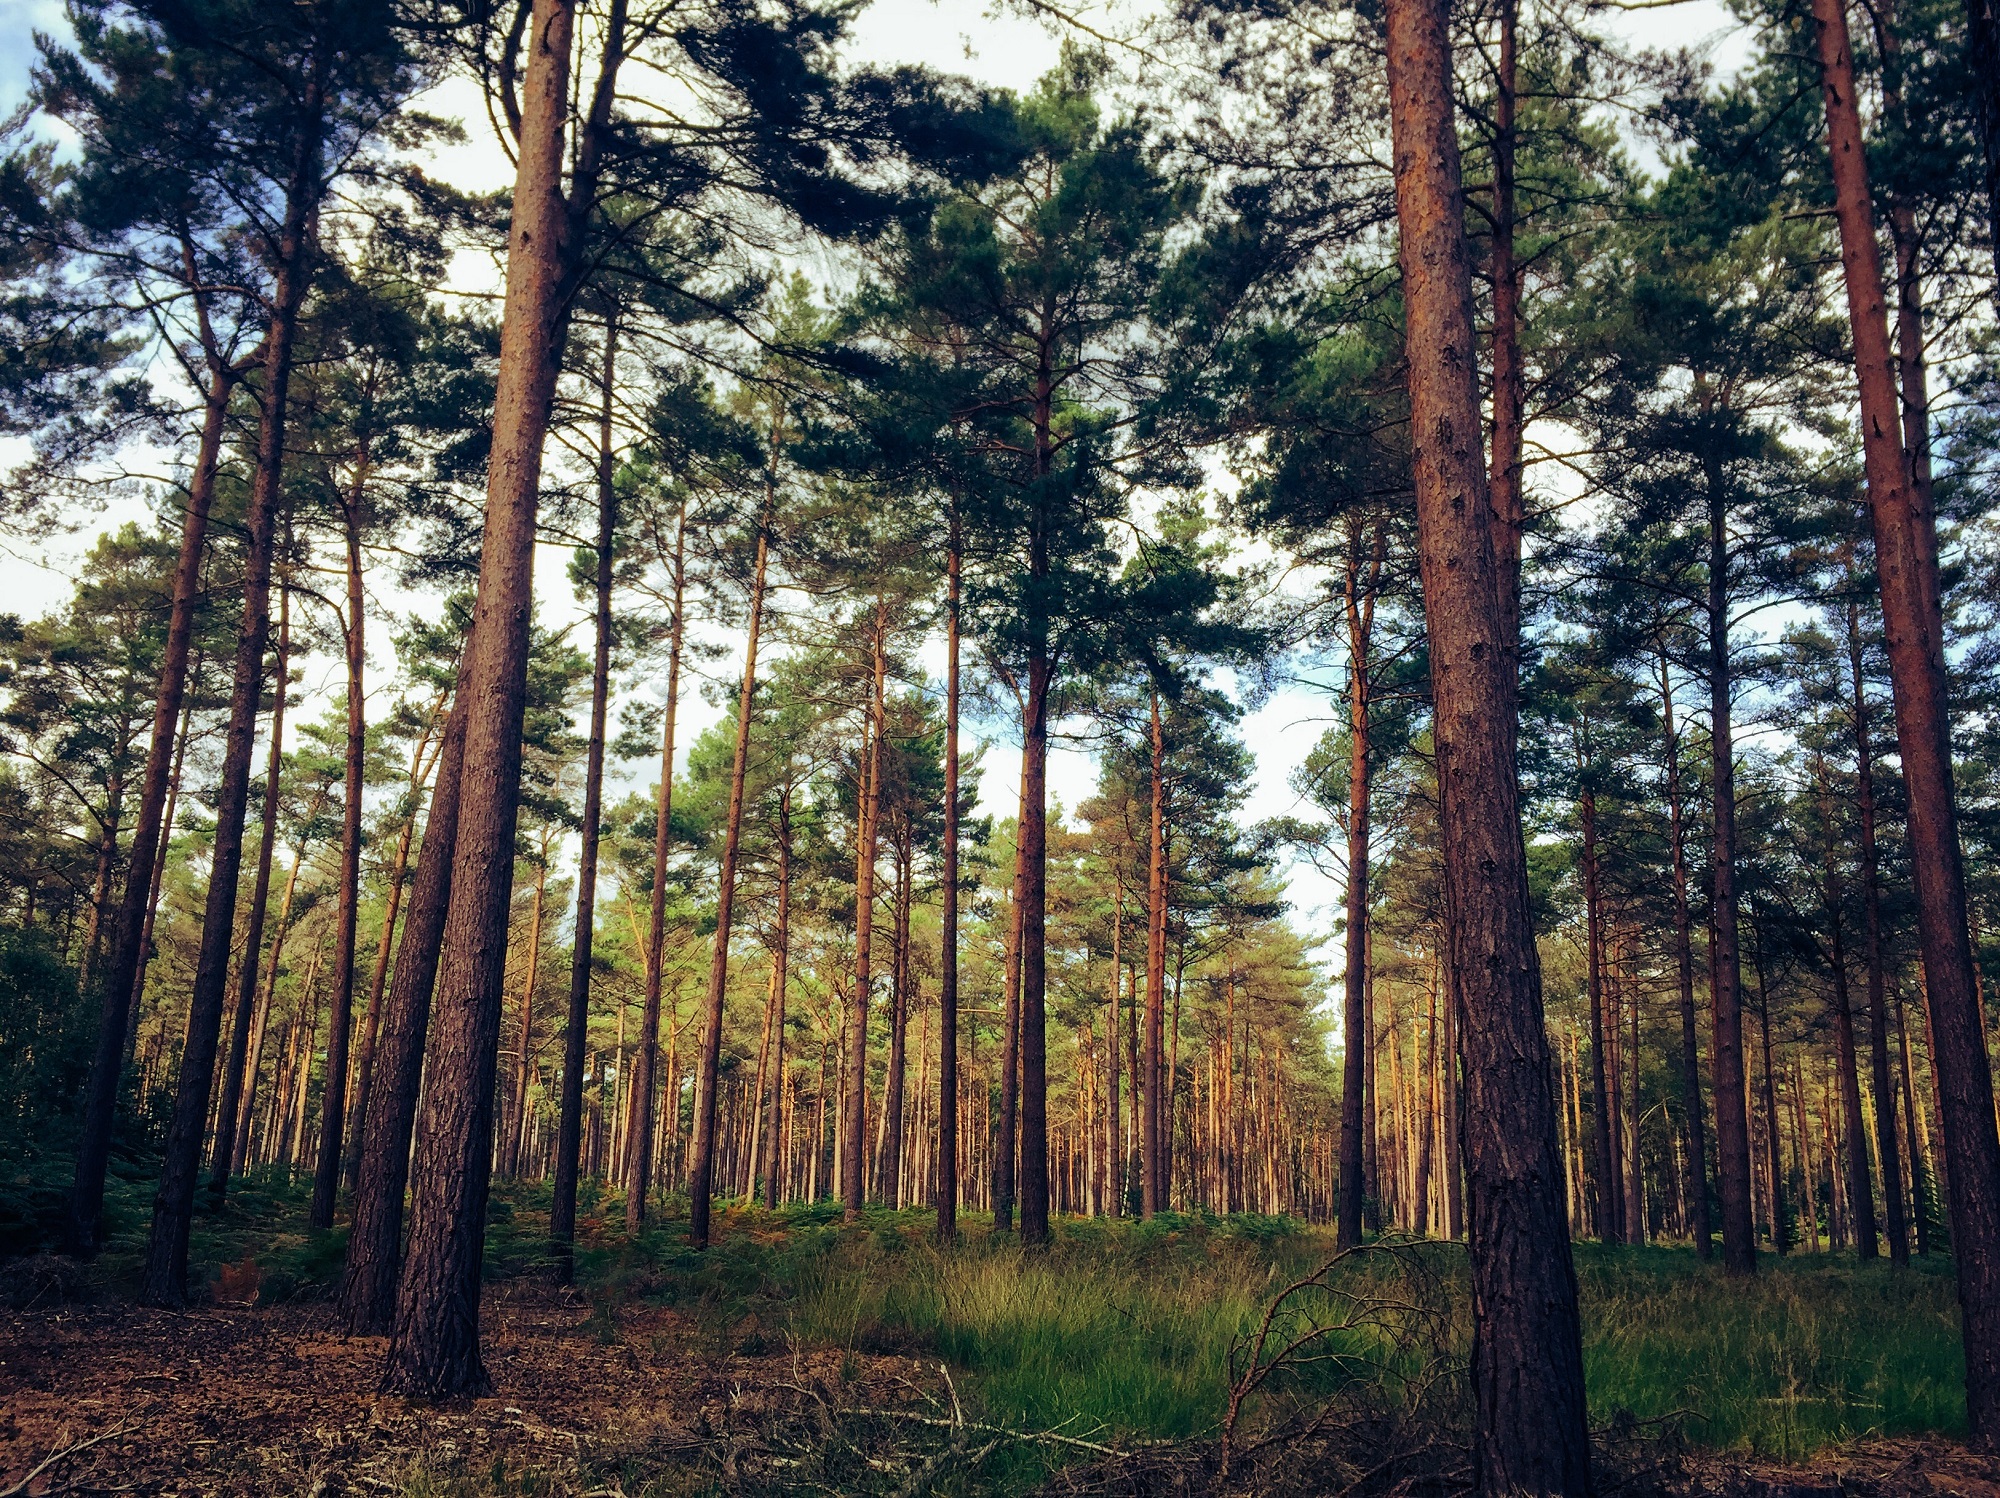 Pine trees at Swinley Forest.